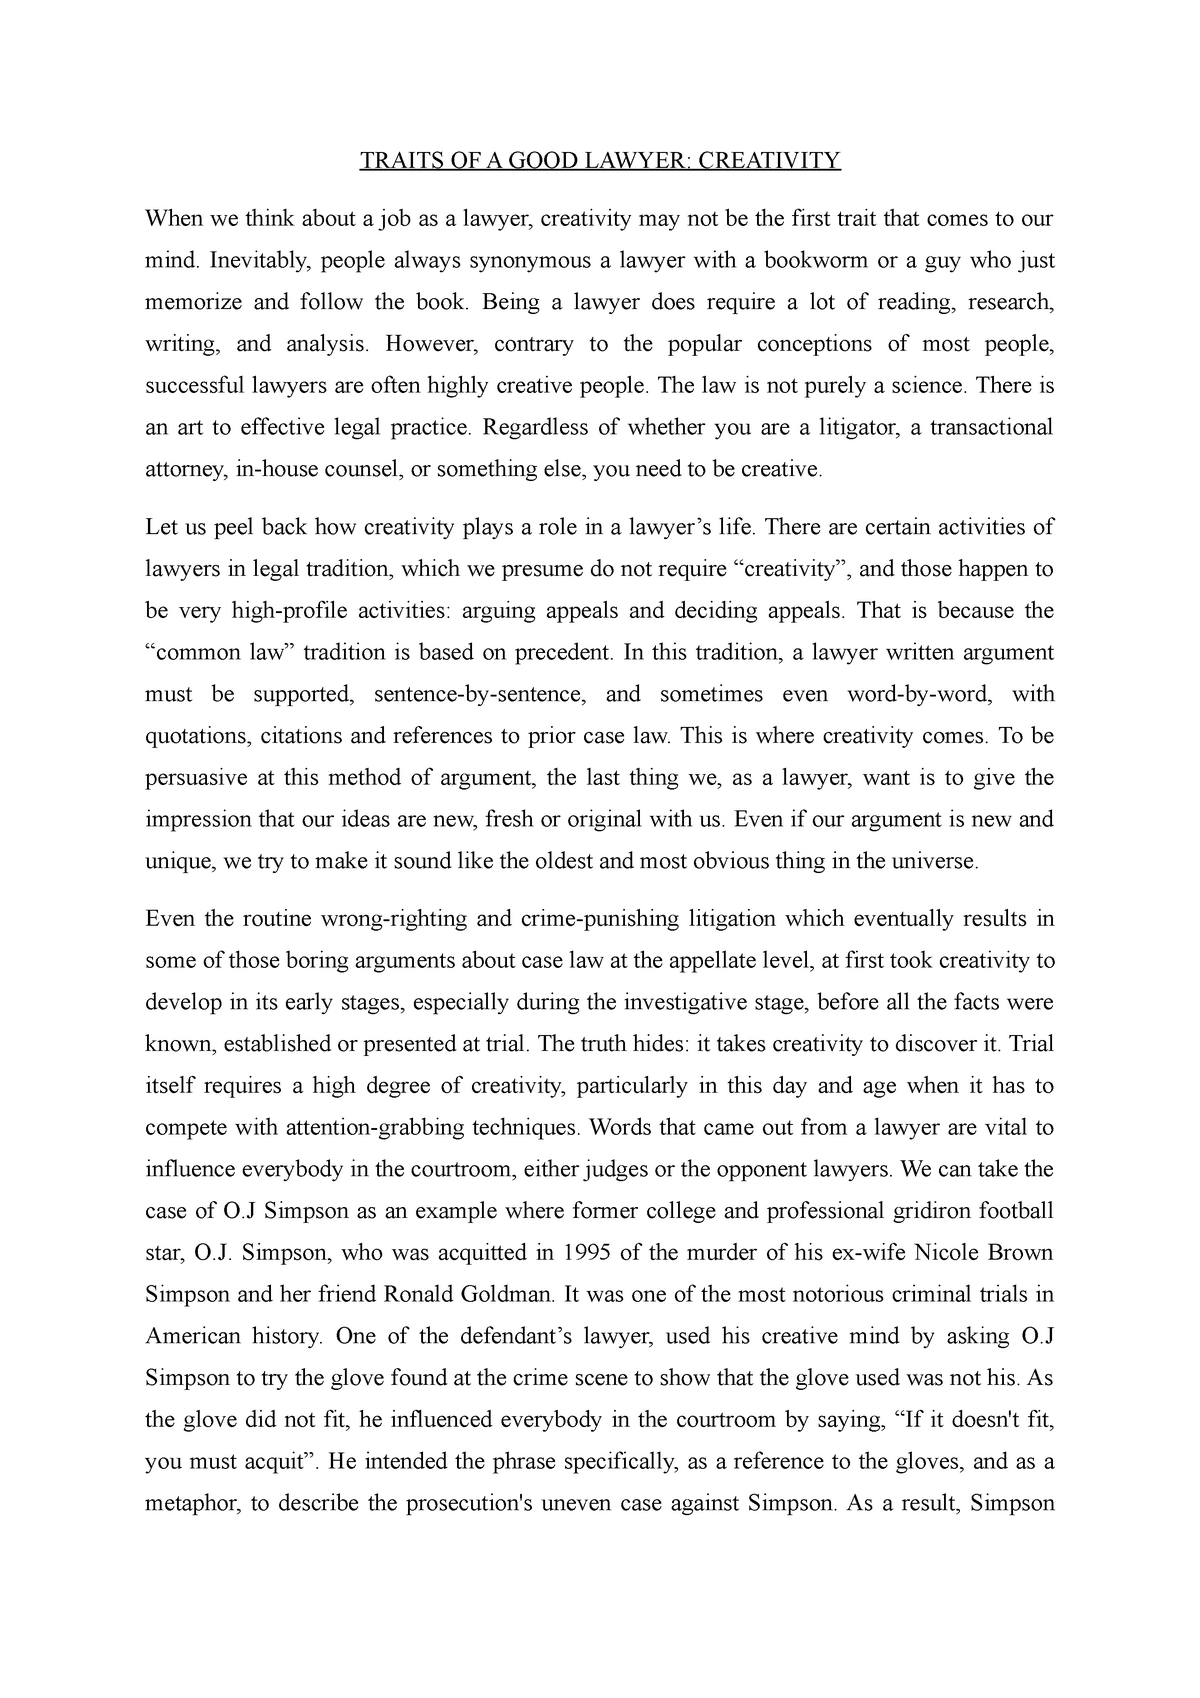 essay about lawyer job